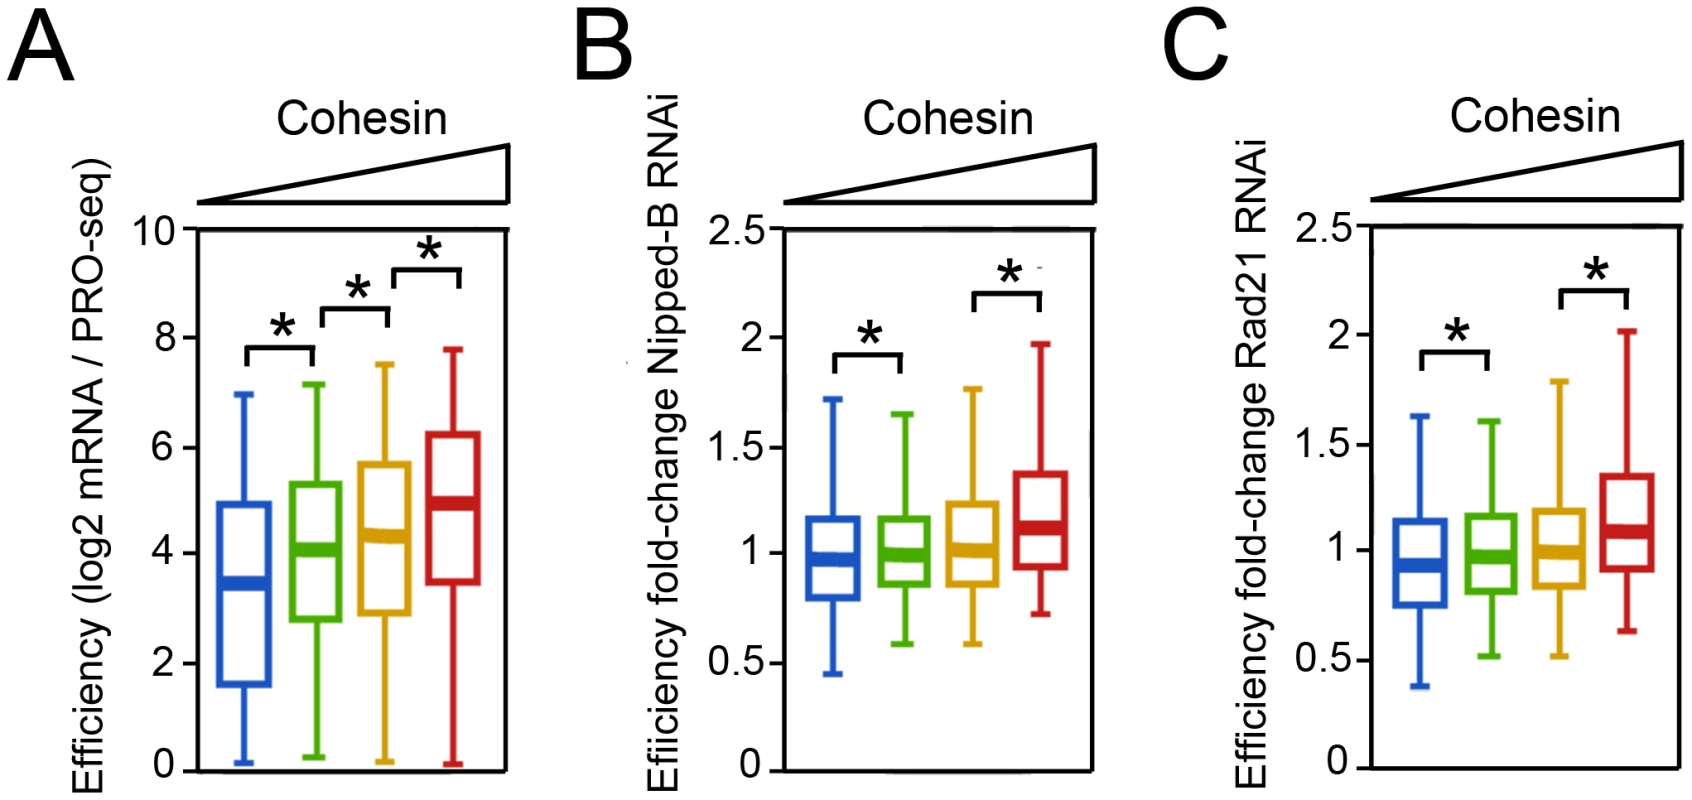 Cohesin-binding genes produce more steady state mRNA per elongating Pol II complex in BG3 cells.